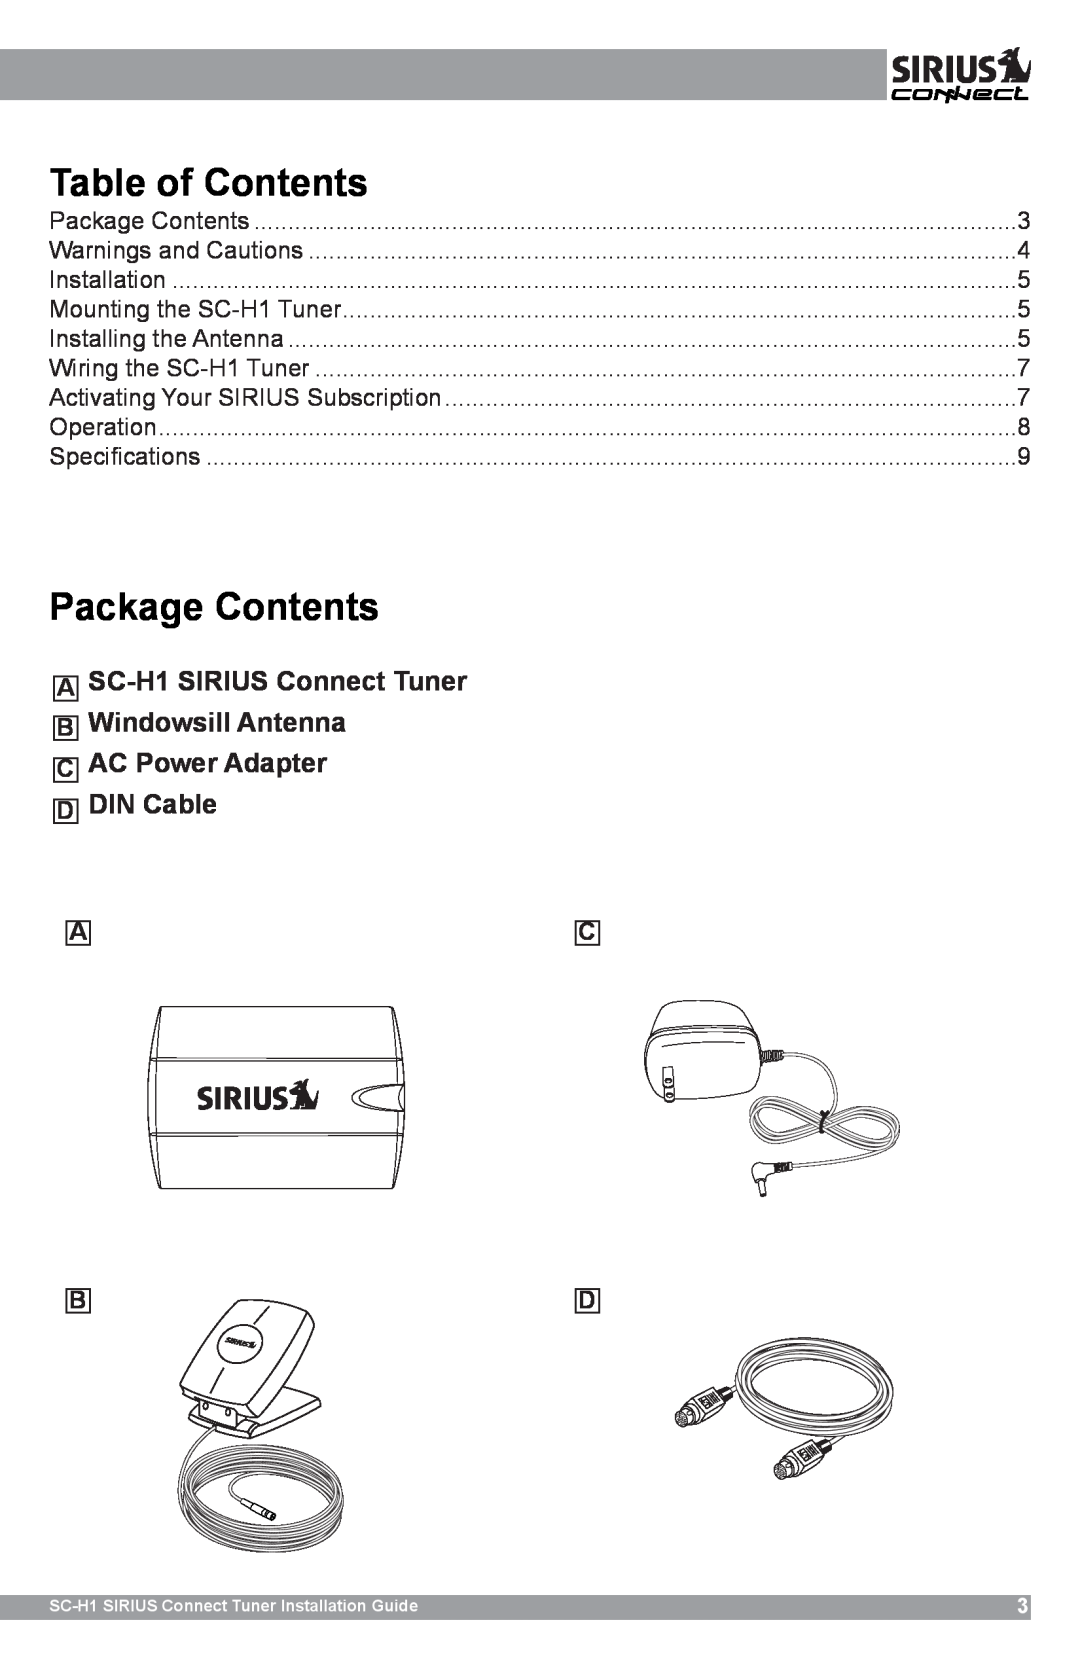 Sirius Satellite Radio SCH1 manual Table of Contents, Package Contents, SC-H1SIRIUS Connect Tuner Windowsill Antenna 